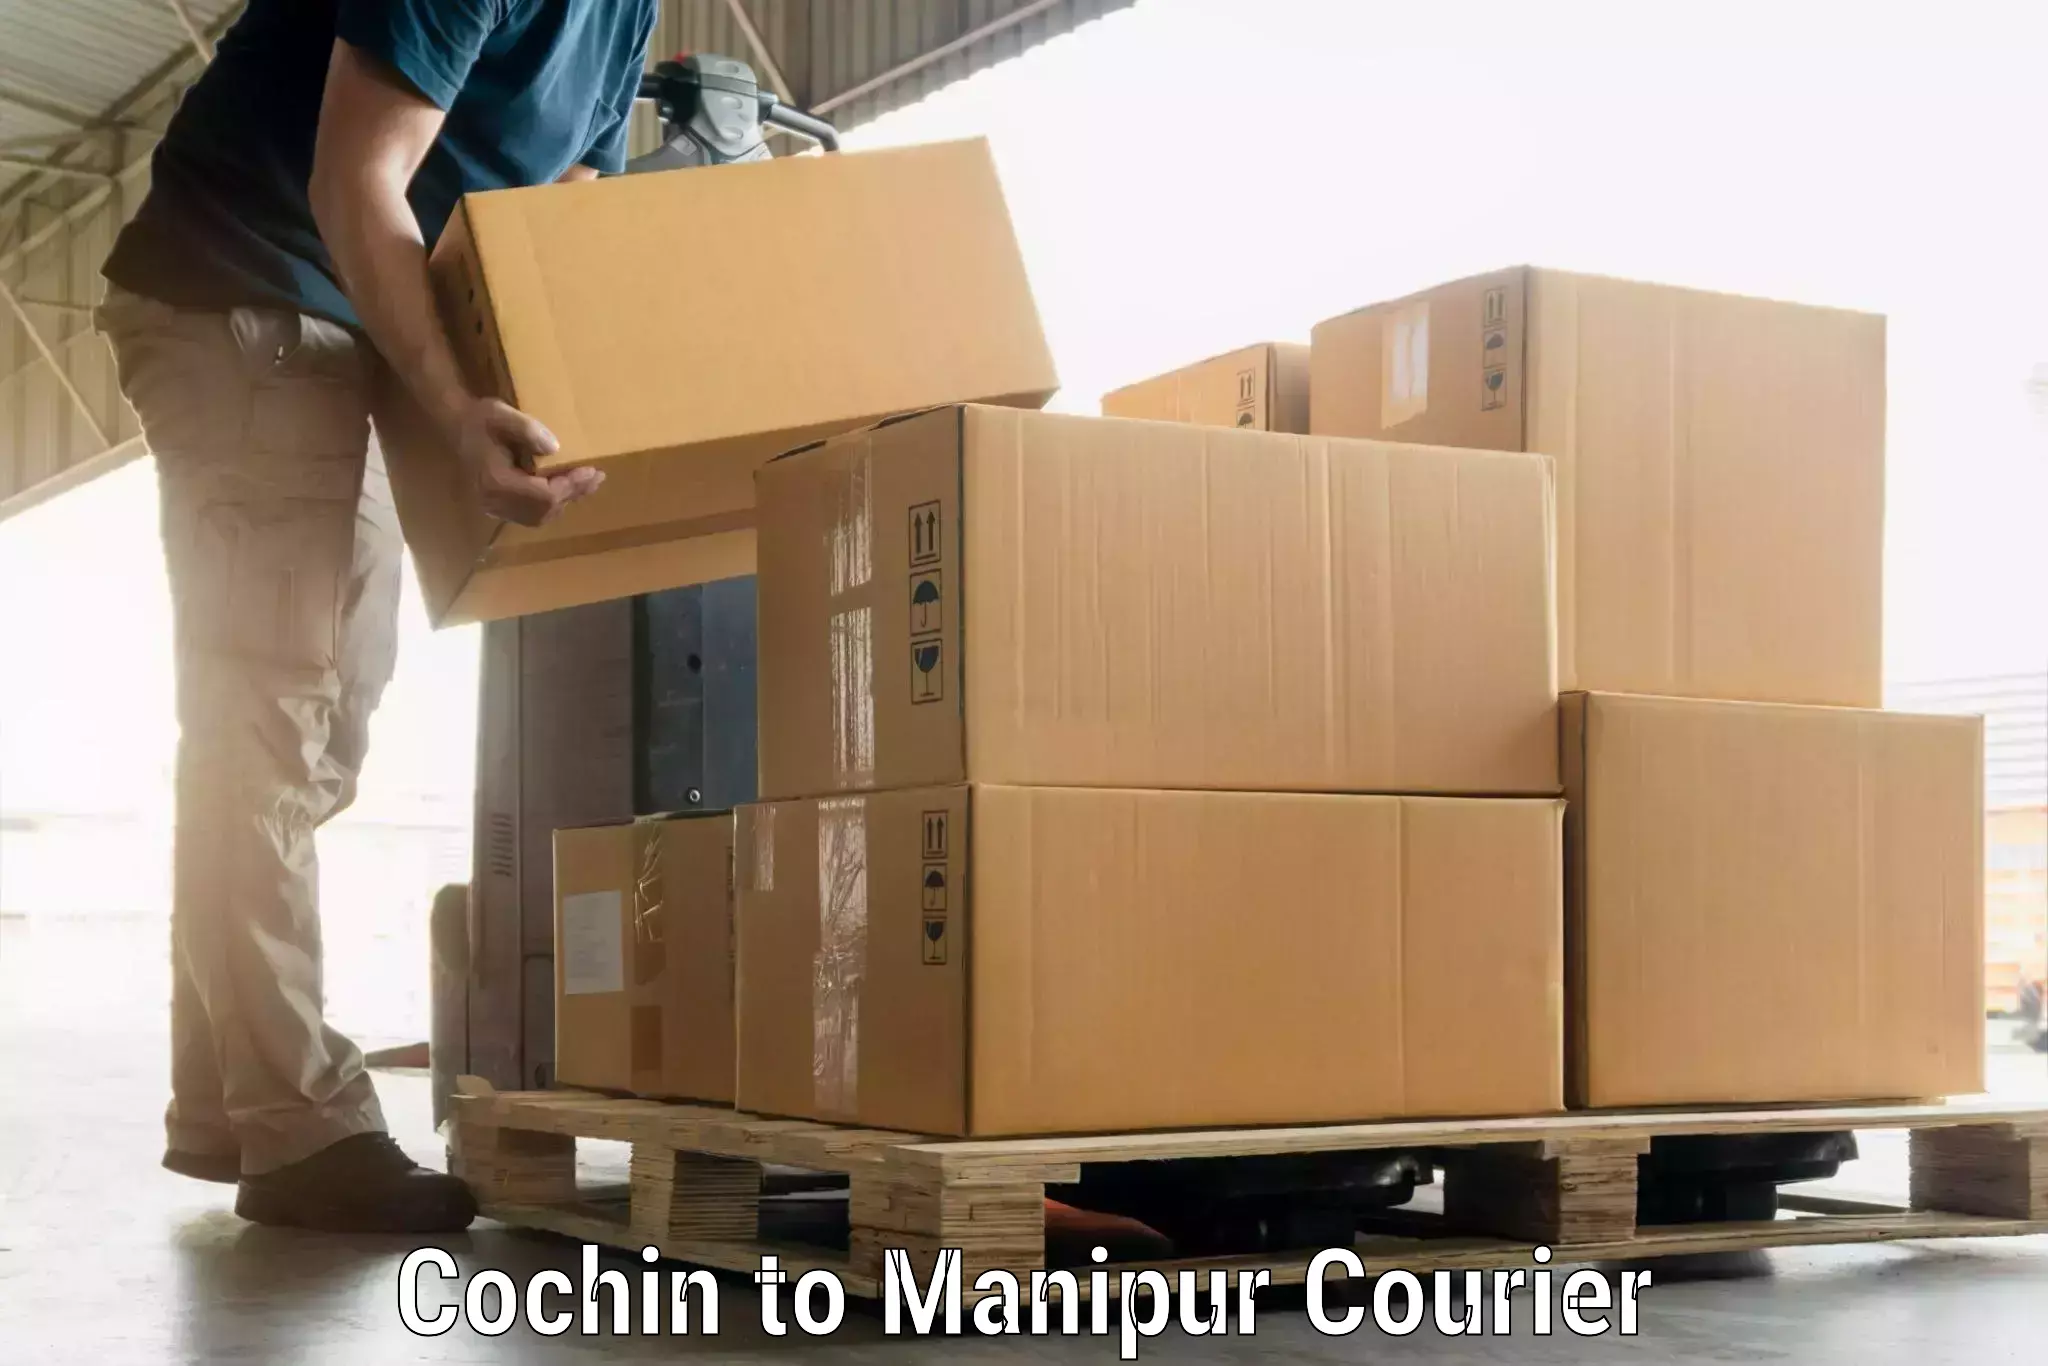 Luggage transport company Cochin to Manipur